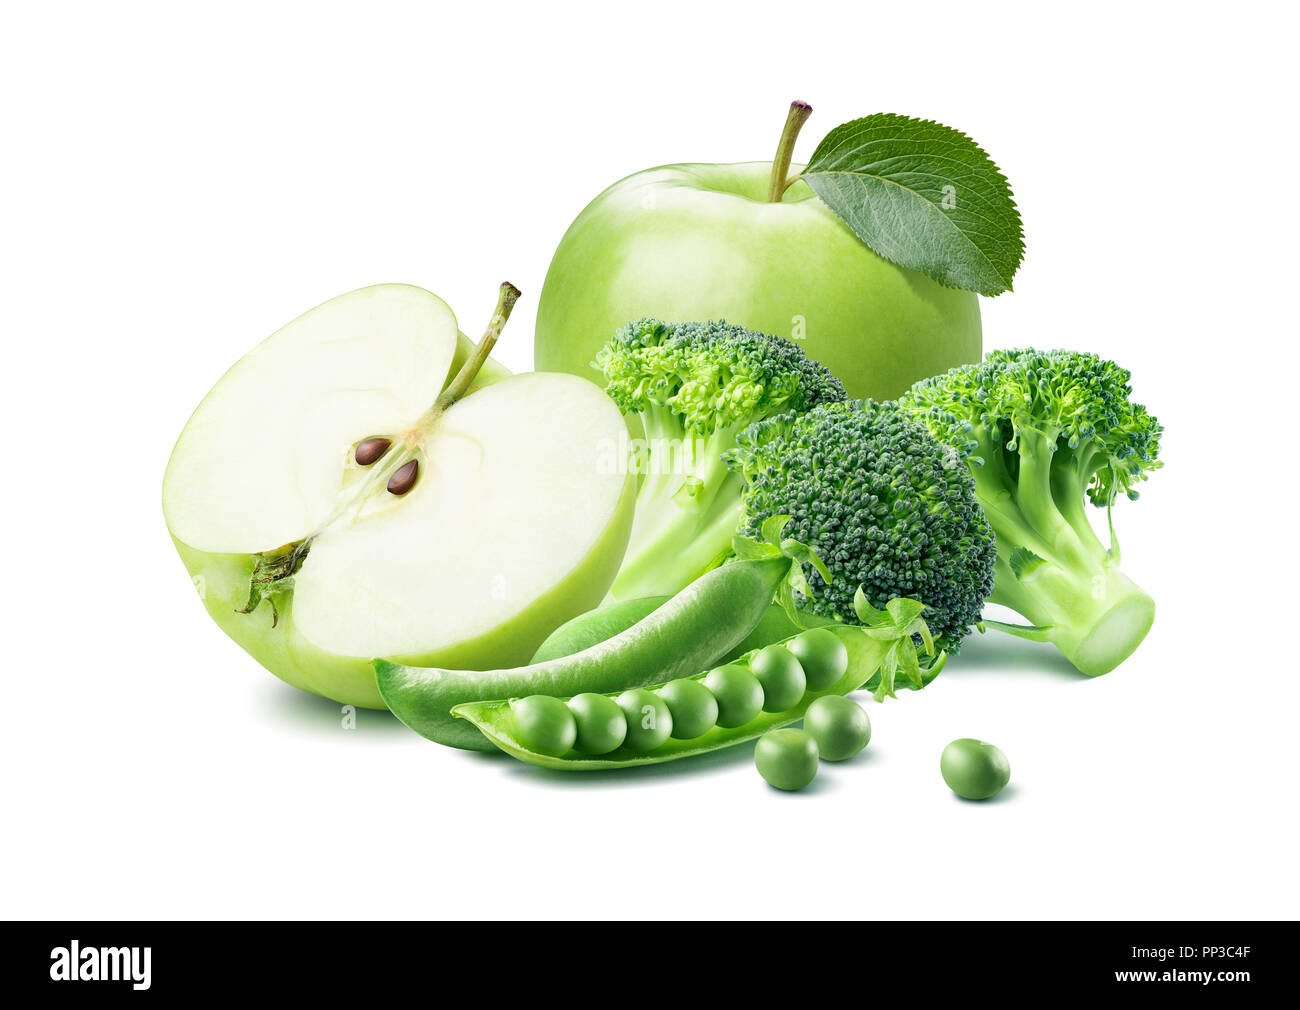 Green apple broccoli peas vegetable 4 composition isolated on white background as package design element Stock Photo